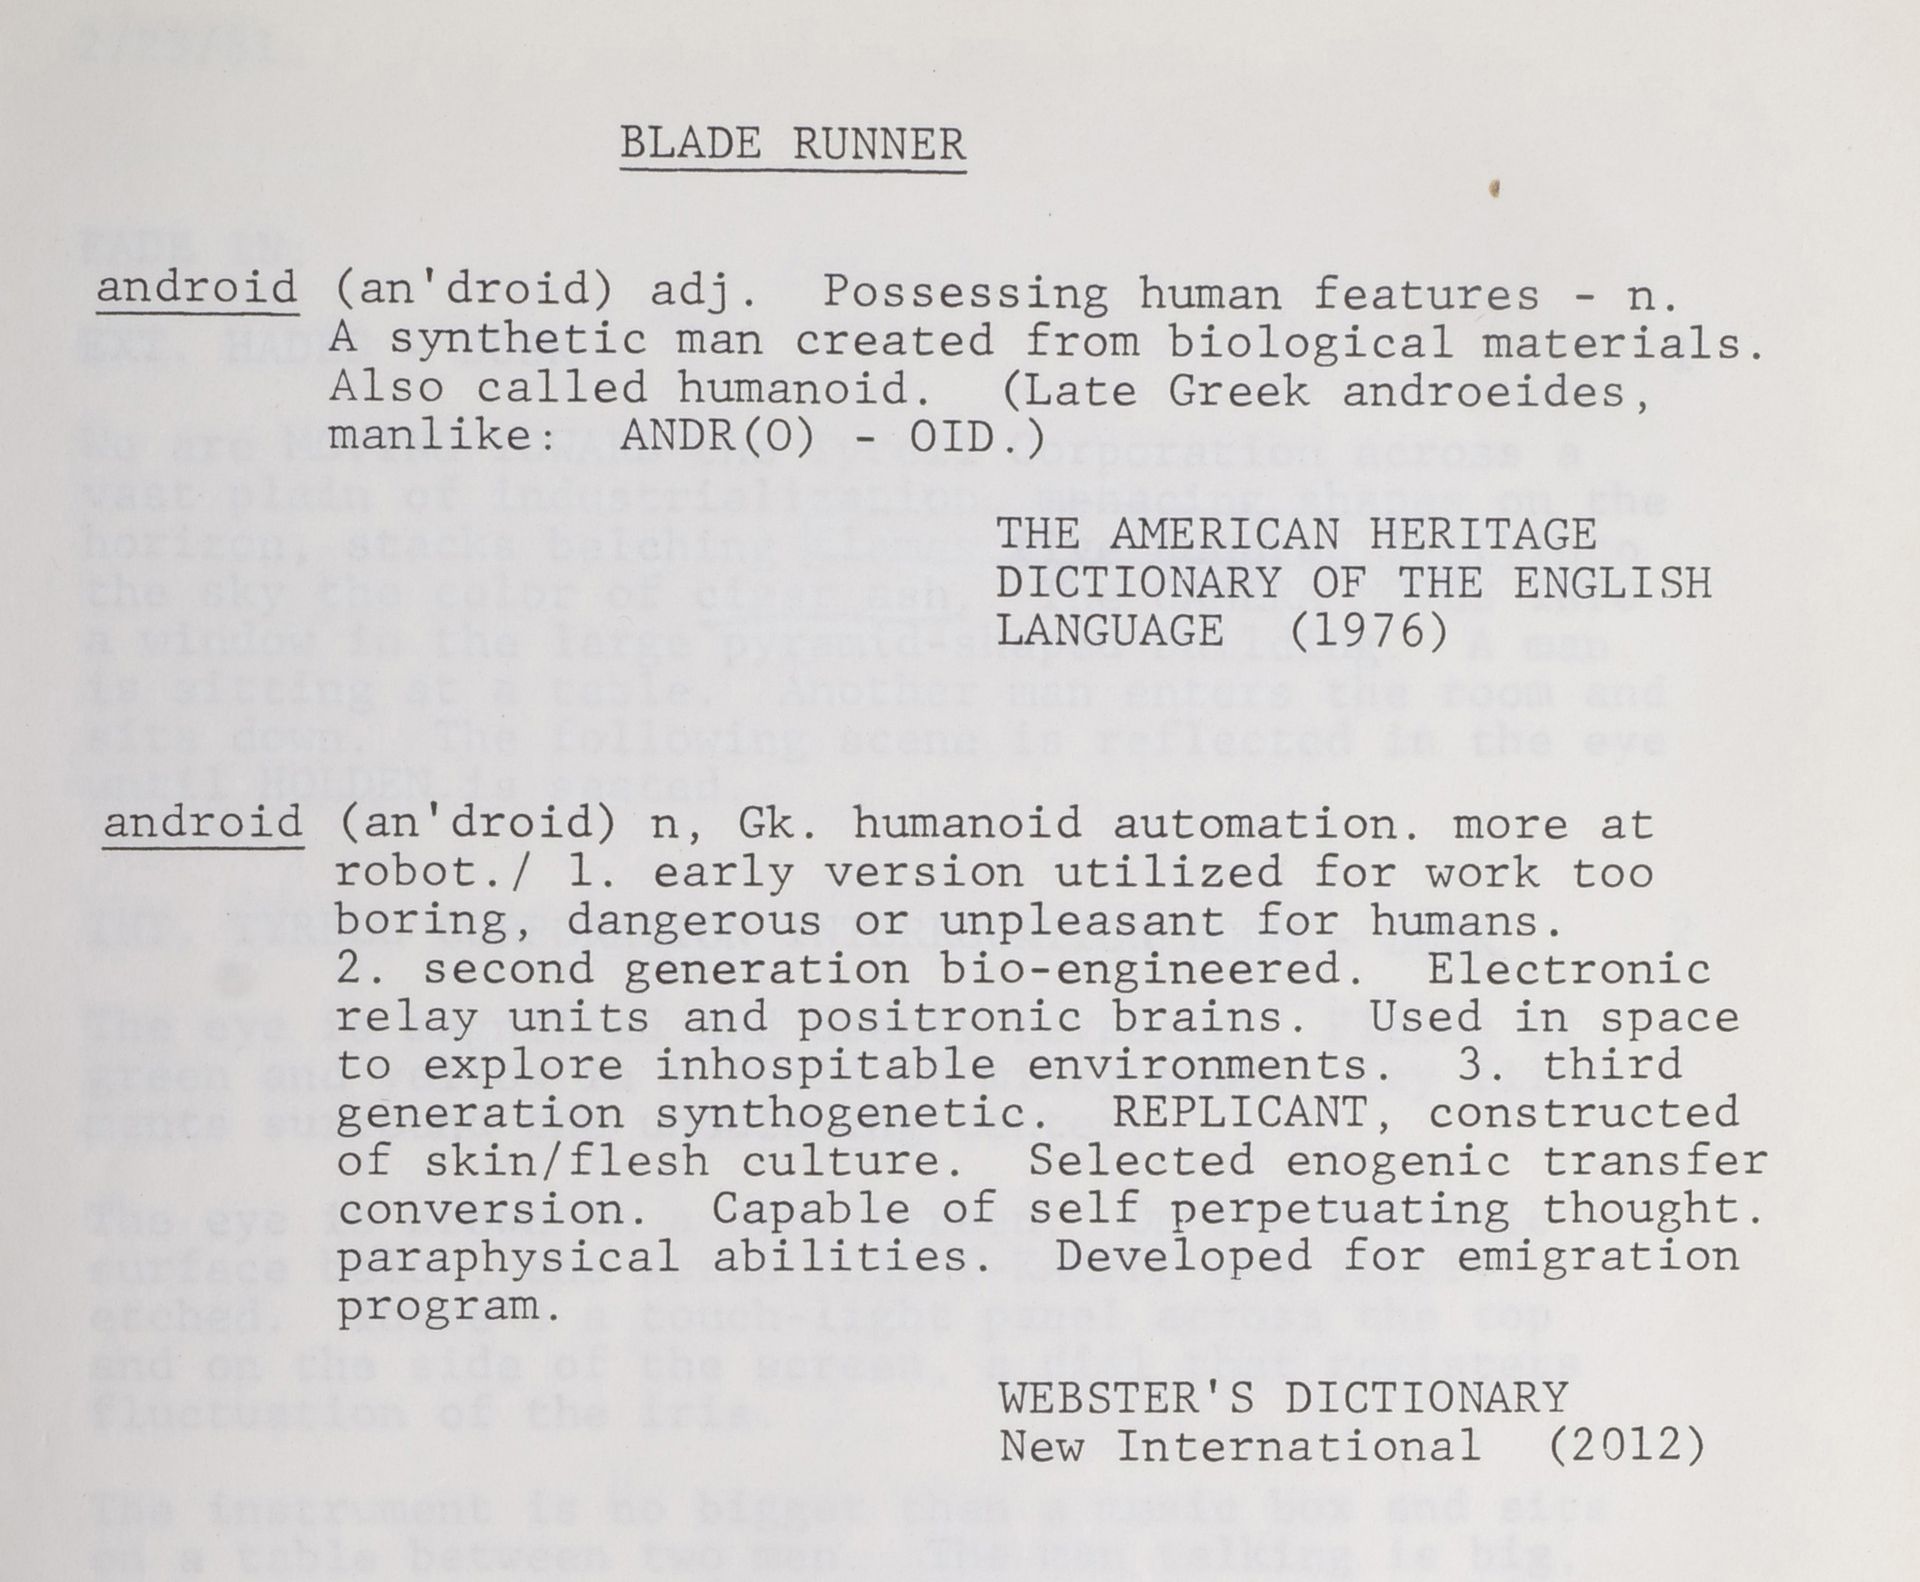 BLADE RUNNER (1982) - Producer's Assistant, Victoria Ewart's Personal Script - Image 3 of 8